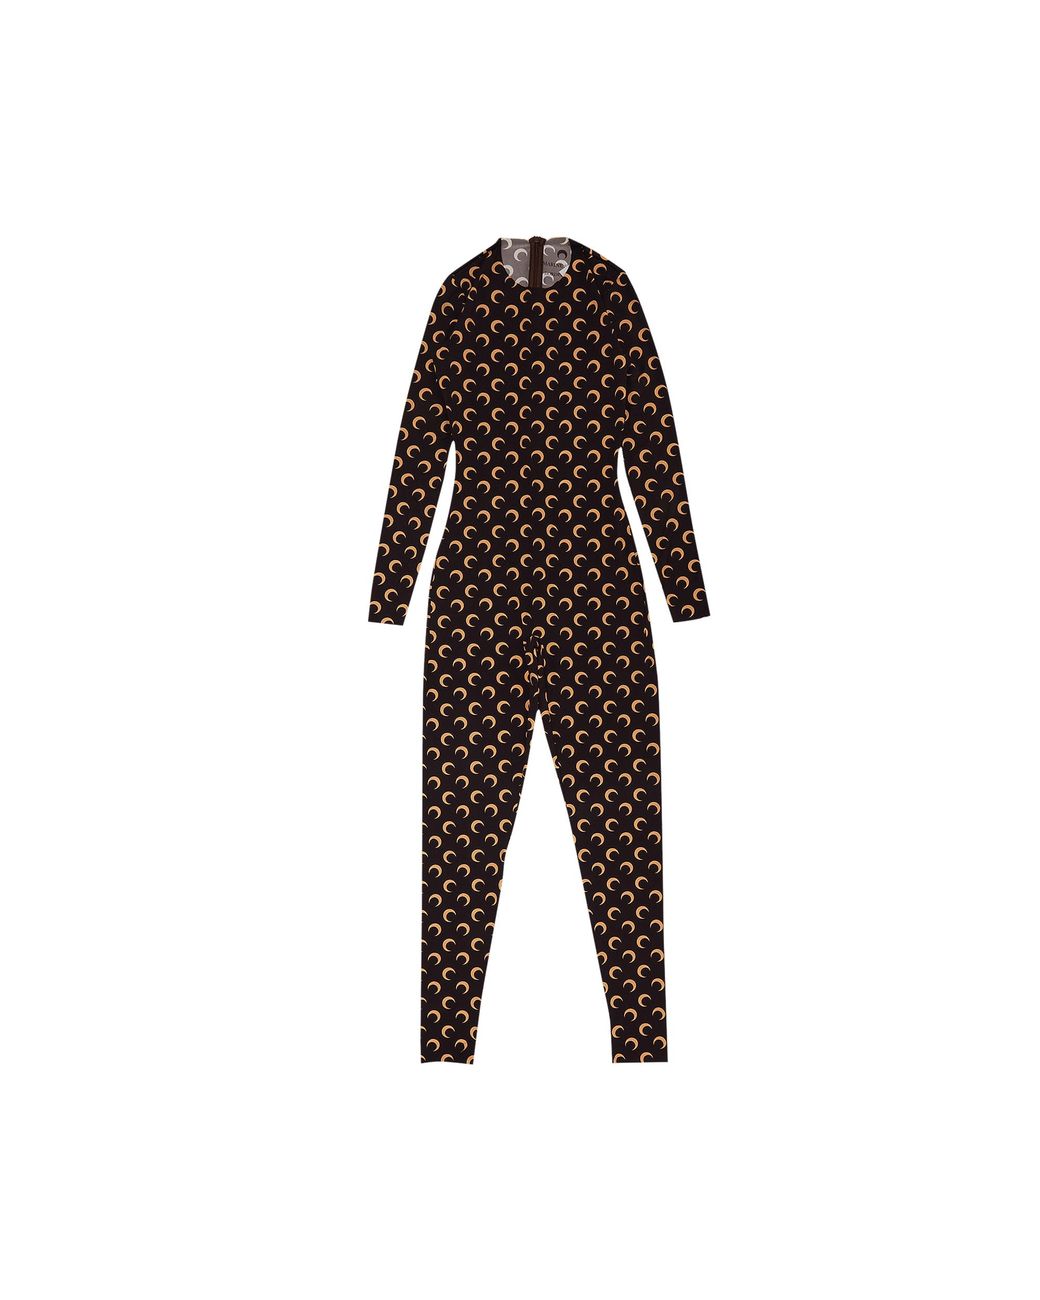 Marine Serre All Over Moon Catsuit 'all Over Moon Brown' in Black | Lyst